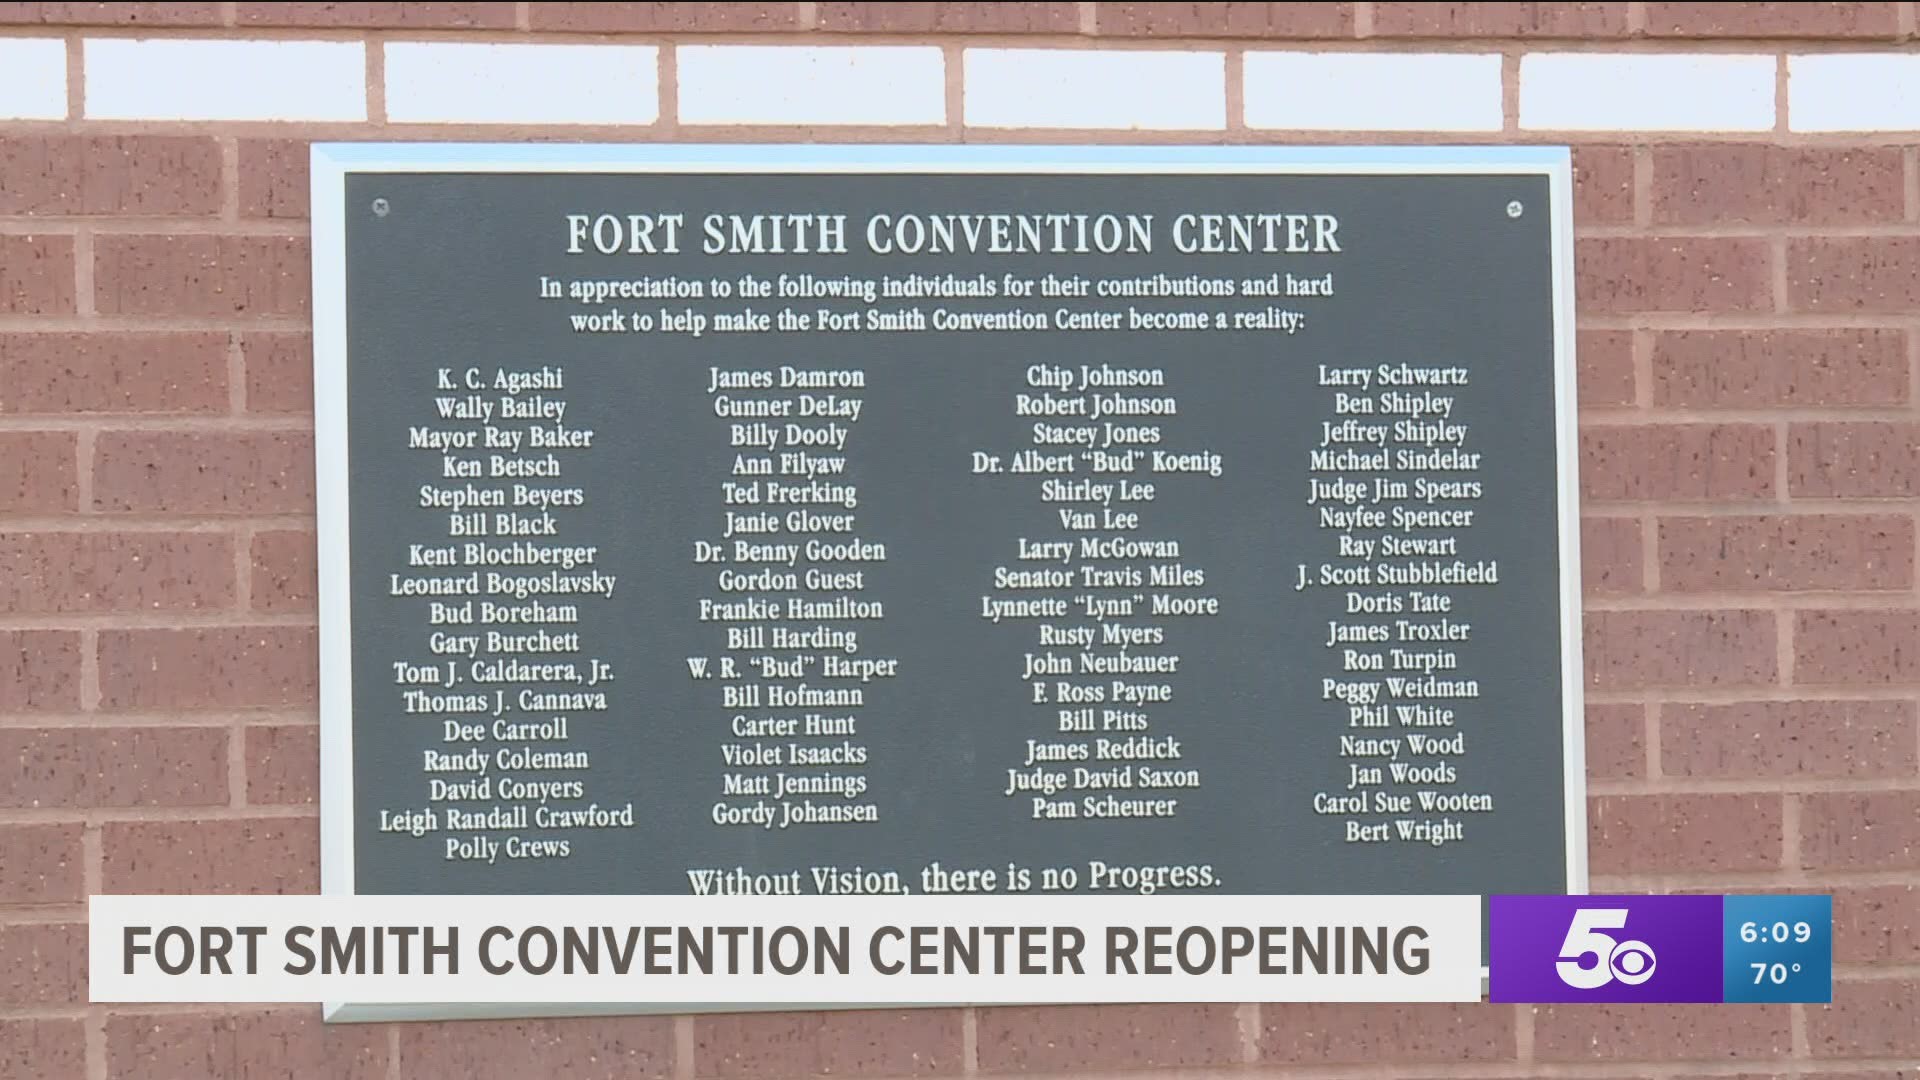 Fort Smith Convention Center to reopen